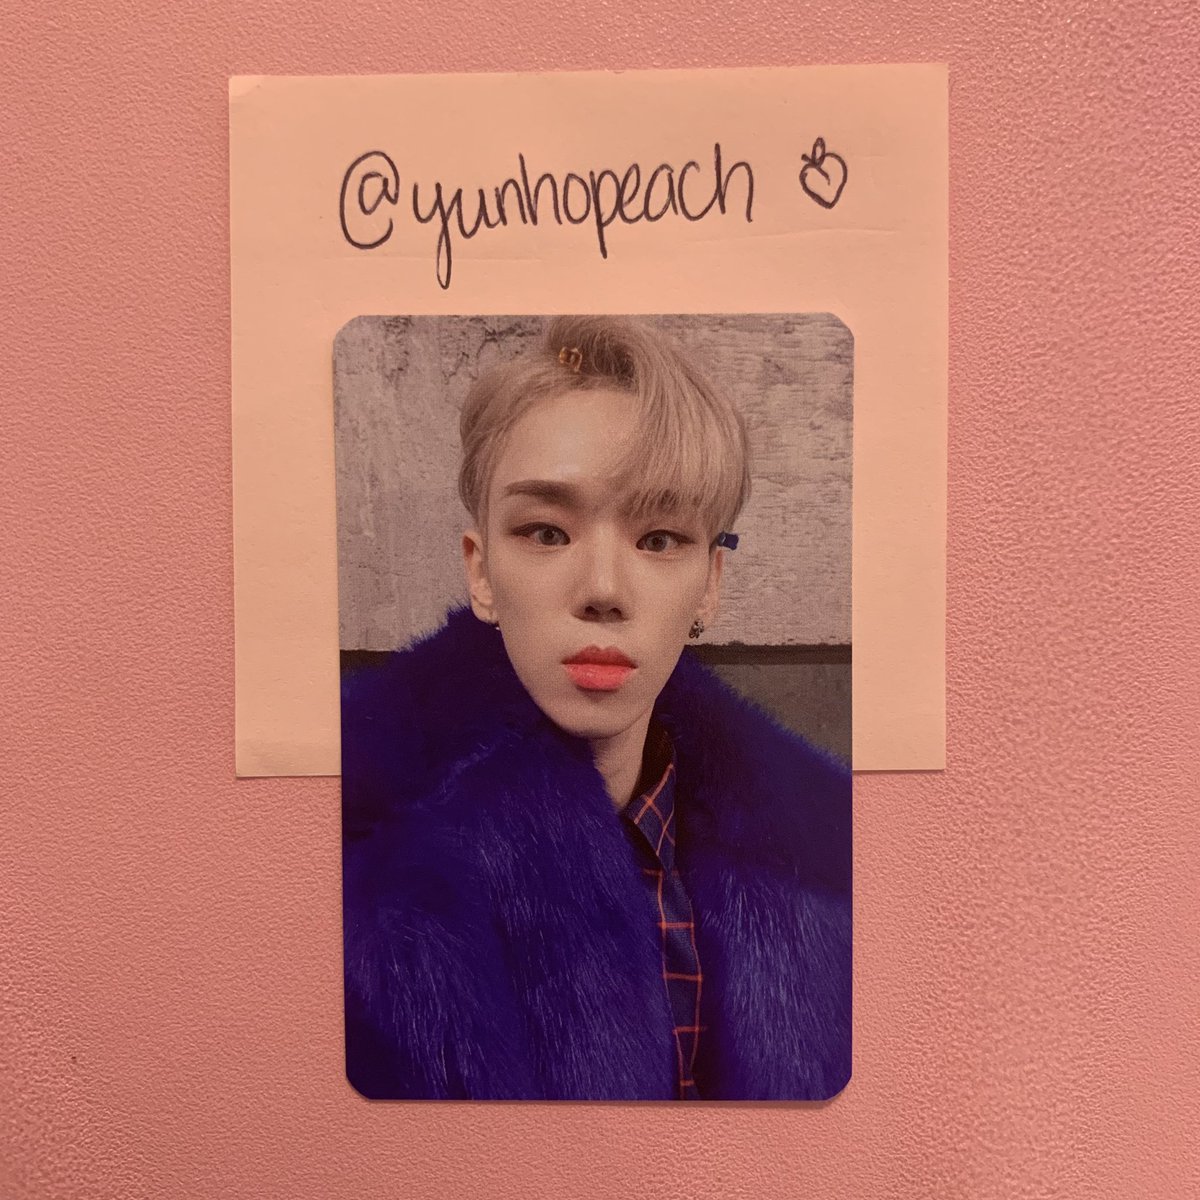 WTT ACE have: a.c.e the mad squad 2 versions of byeongkwan want: any wow / sehyoon from this album ww: US preferred, but ww is ok! @KpoptradeU  @photocard_kpop  @kpopthriftshop  @ACECHOICETRADES